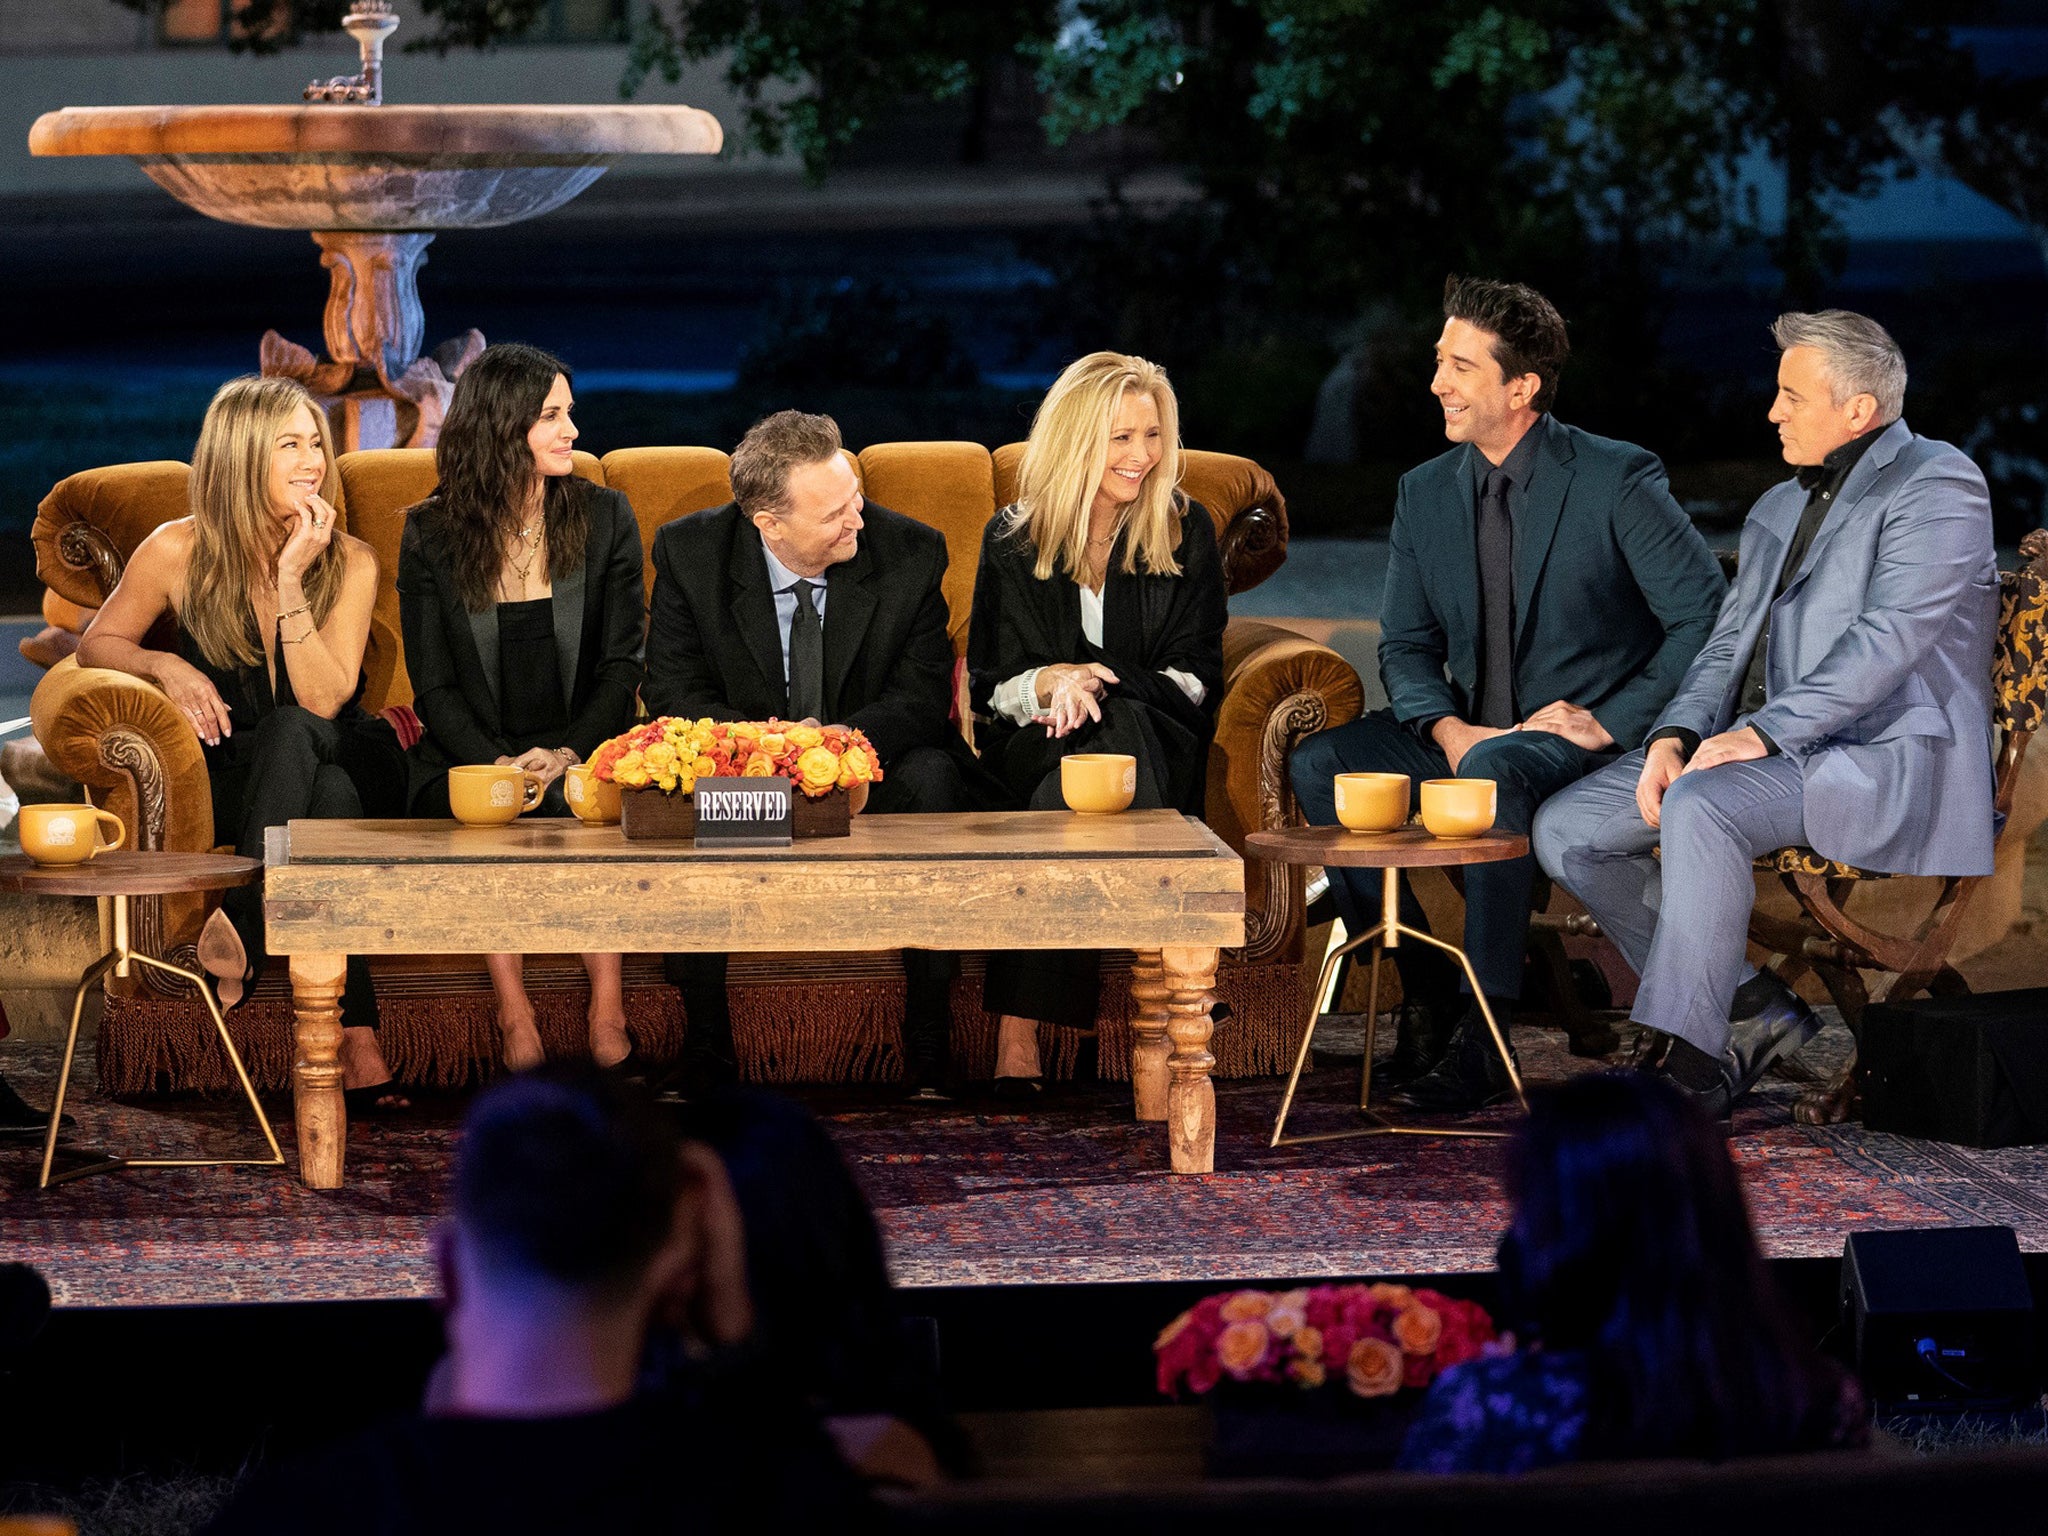 The ‘Friends’ cast reunited for the televised special